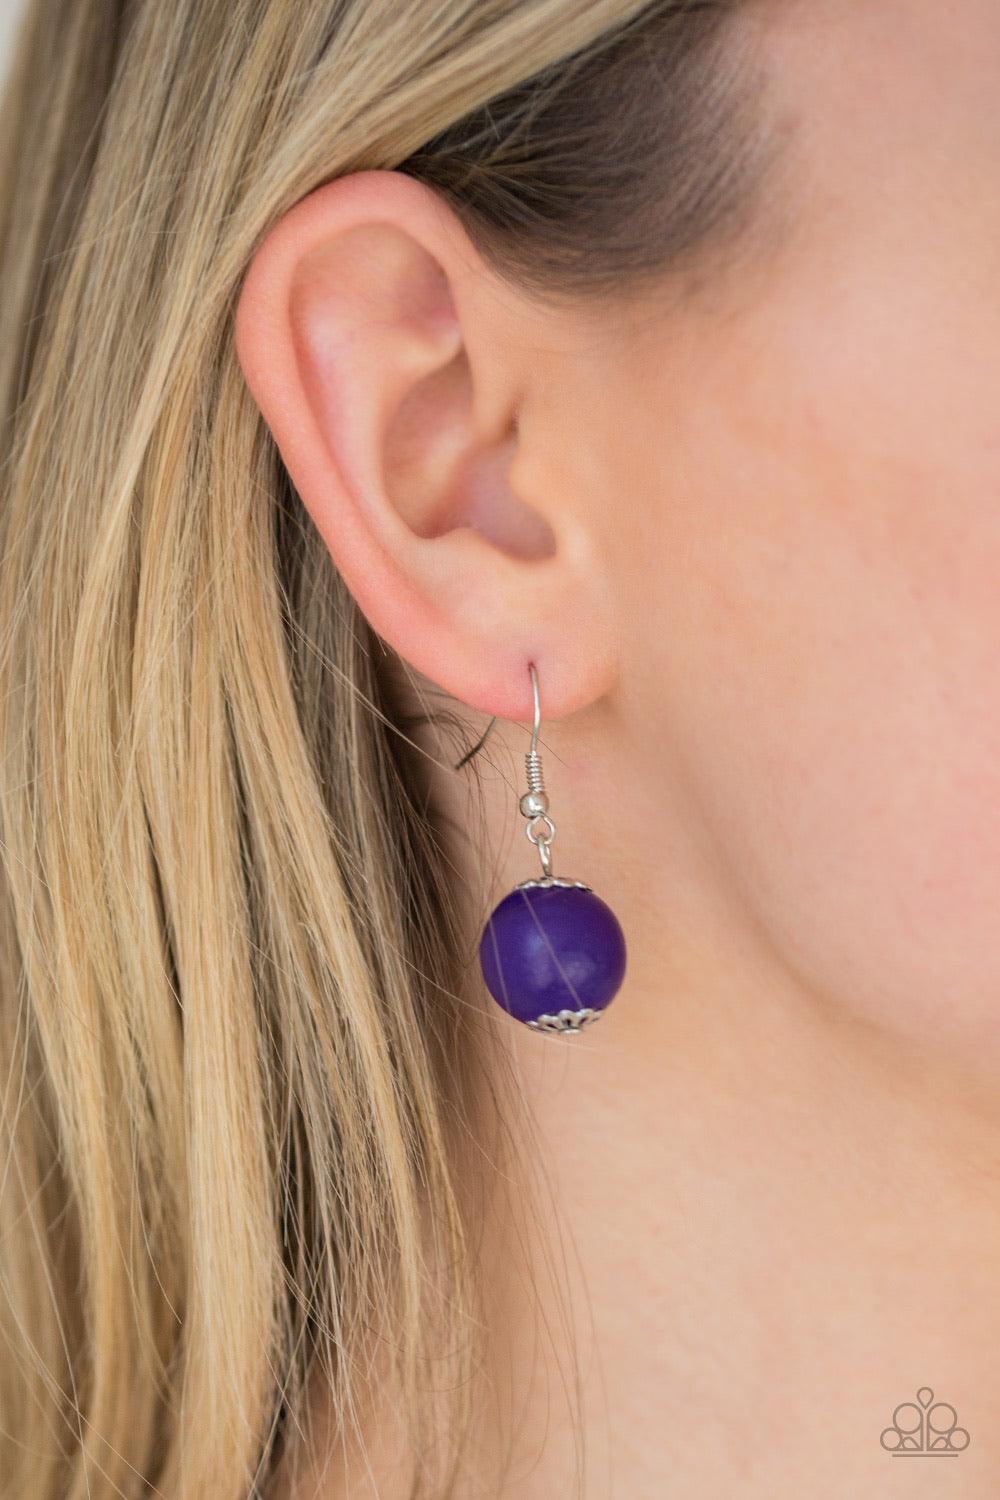 Paparazzi Accessories Summer Breezin - Purple A variety of purple wooden beads are threaded along a brown string draped across the chest for a summery flair. Jewelry